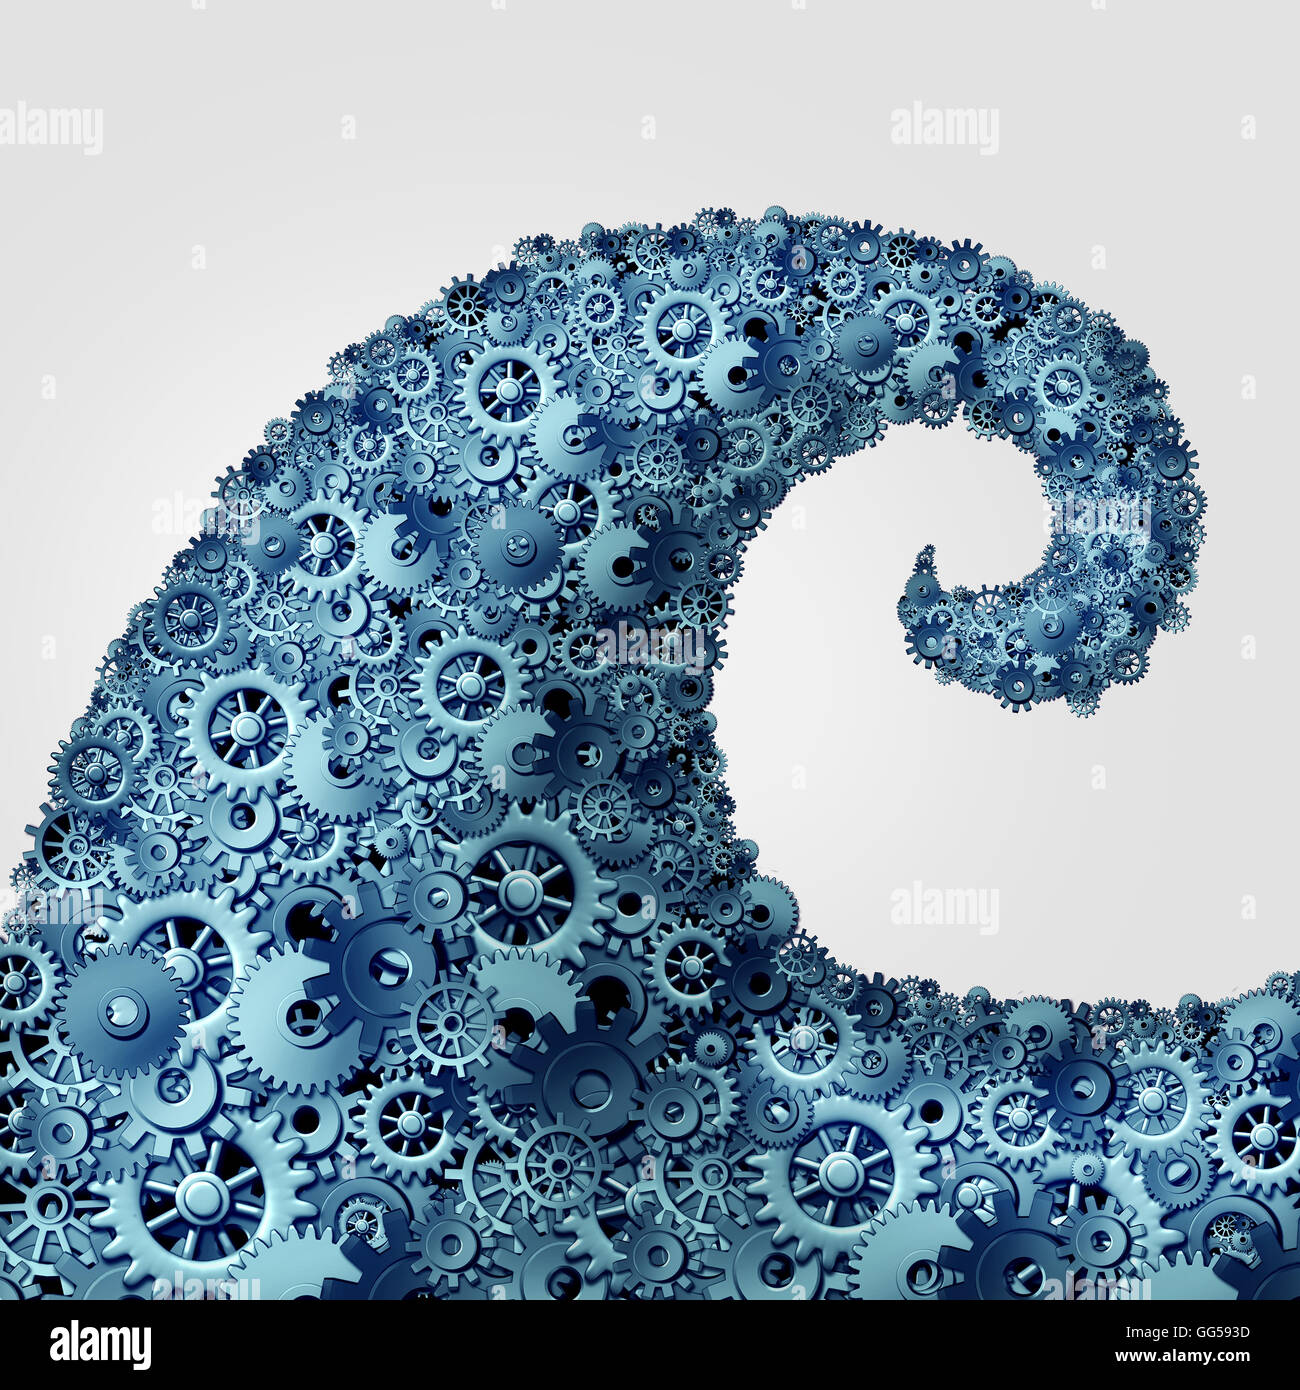 Business wave trends concept as a group of cogwheel and gear objects shaped as an ocean wave surging with force as a metaphor for technology current of change as a 3D illustration. Stock Photo